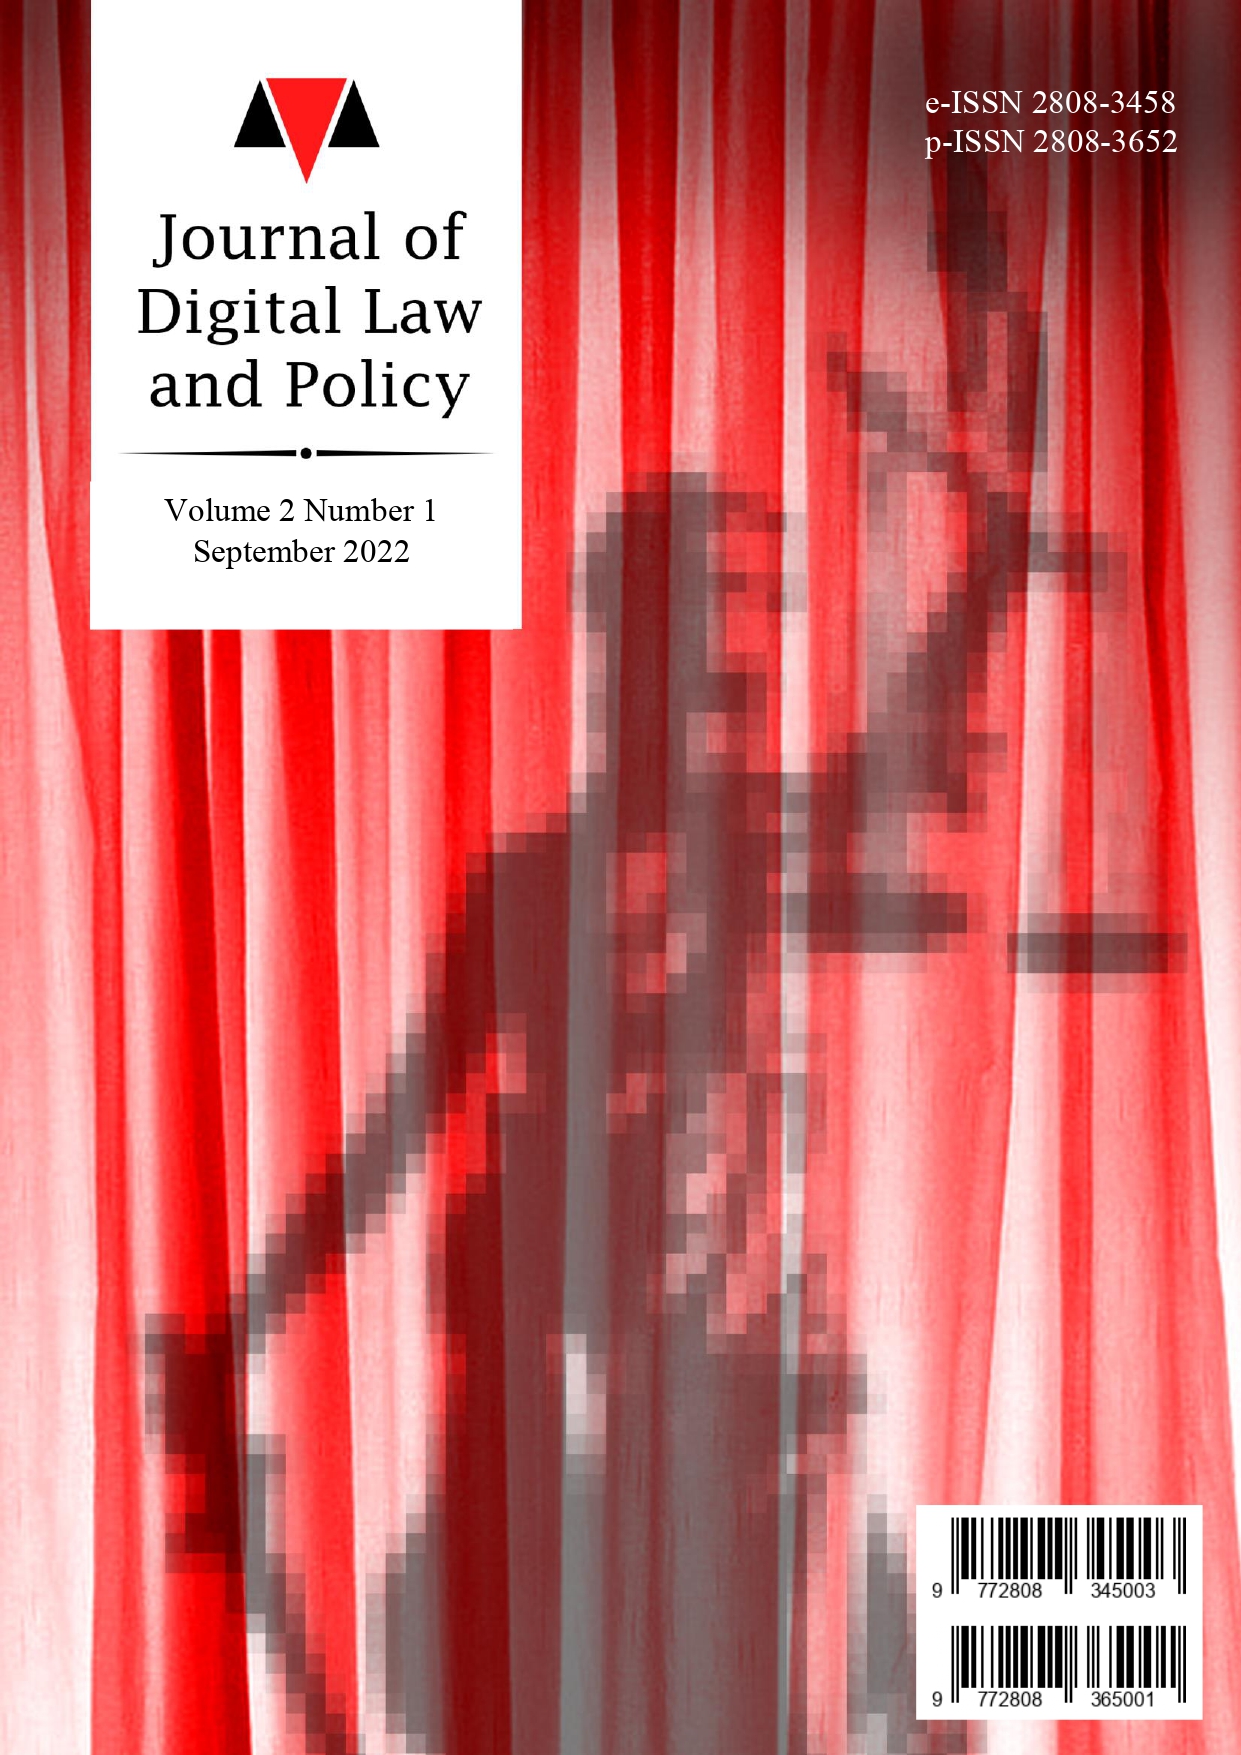 					View Vol. 2 No. 1 (2022): Journal of Digital Law and Policy - September 2022
				